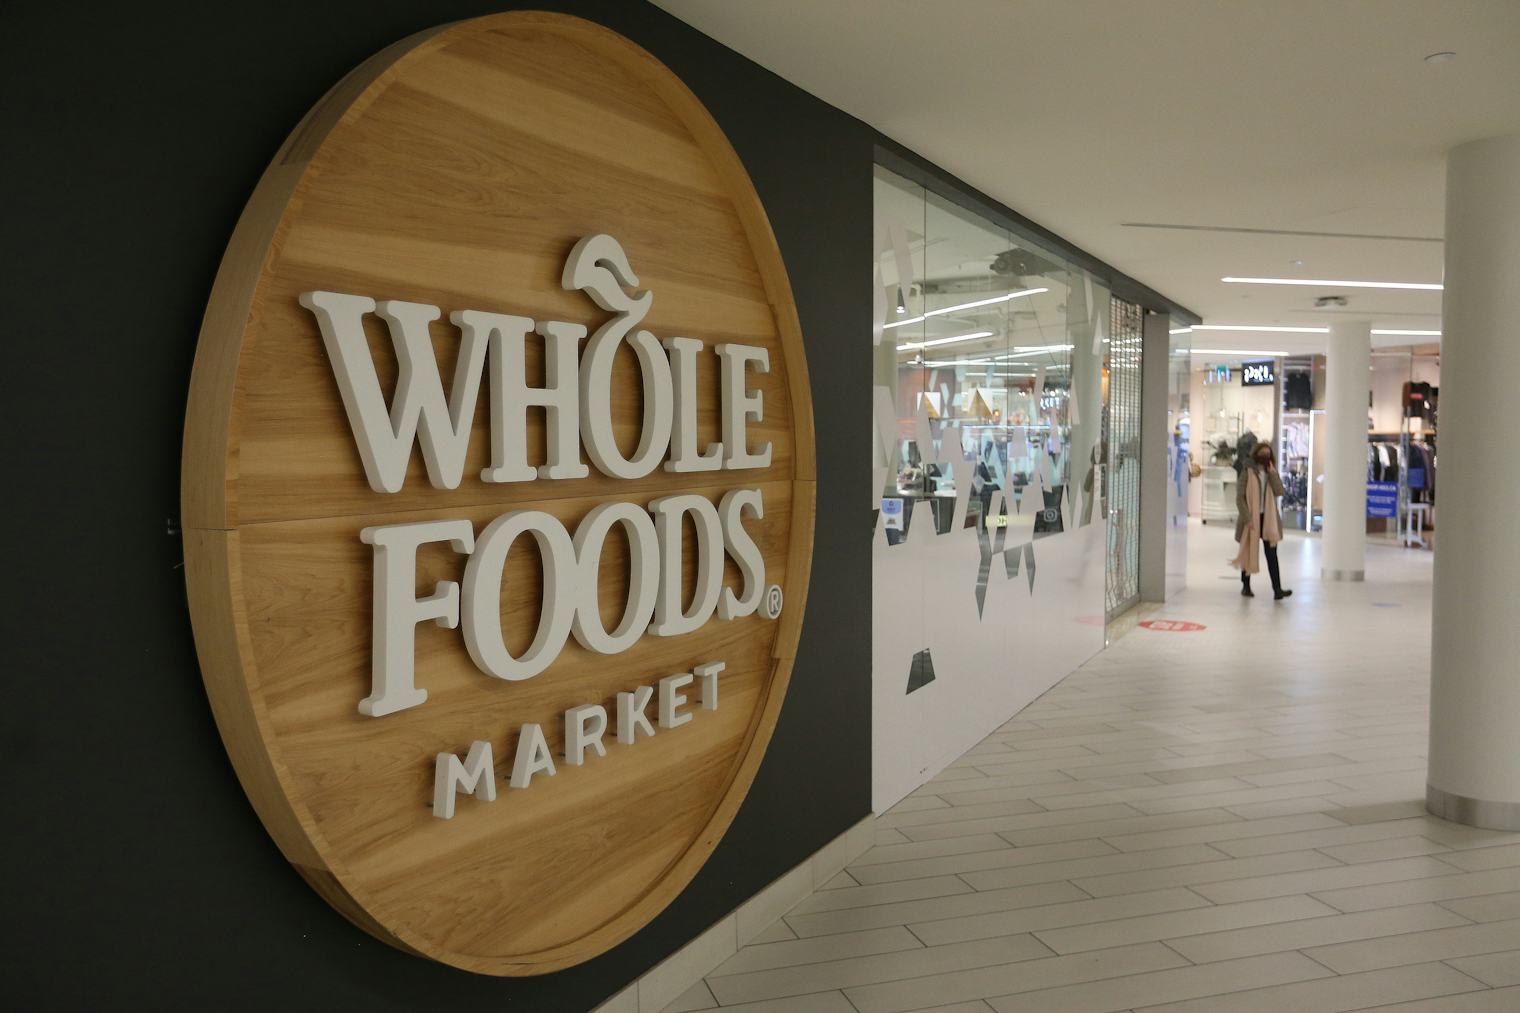 Is Whole Foods Open Thanksgiving 2021?